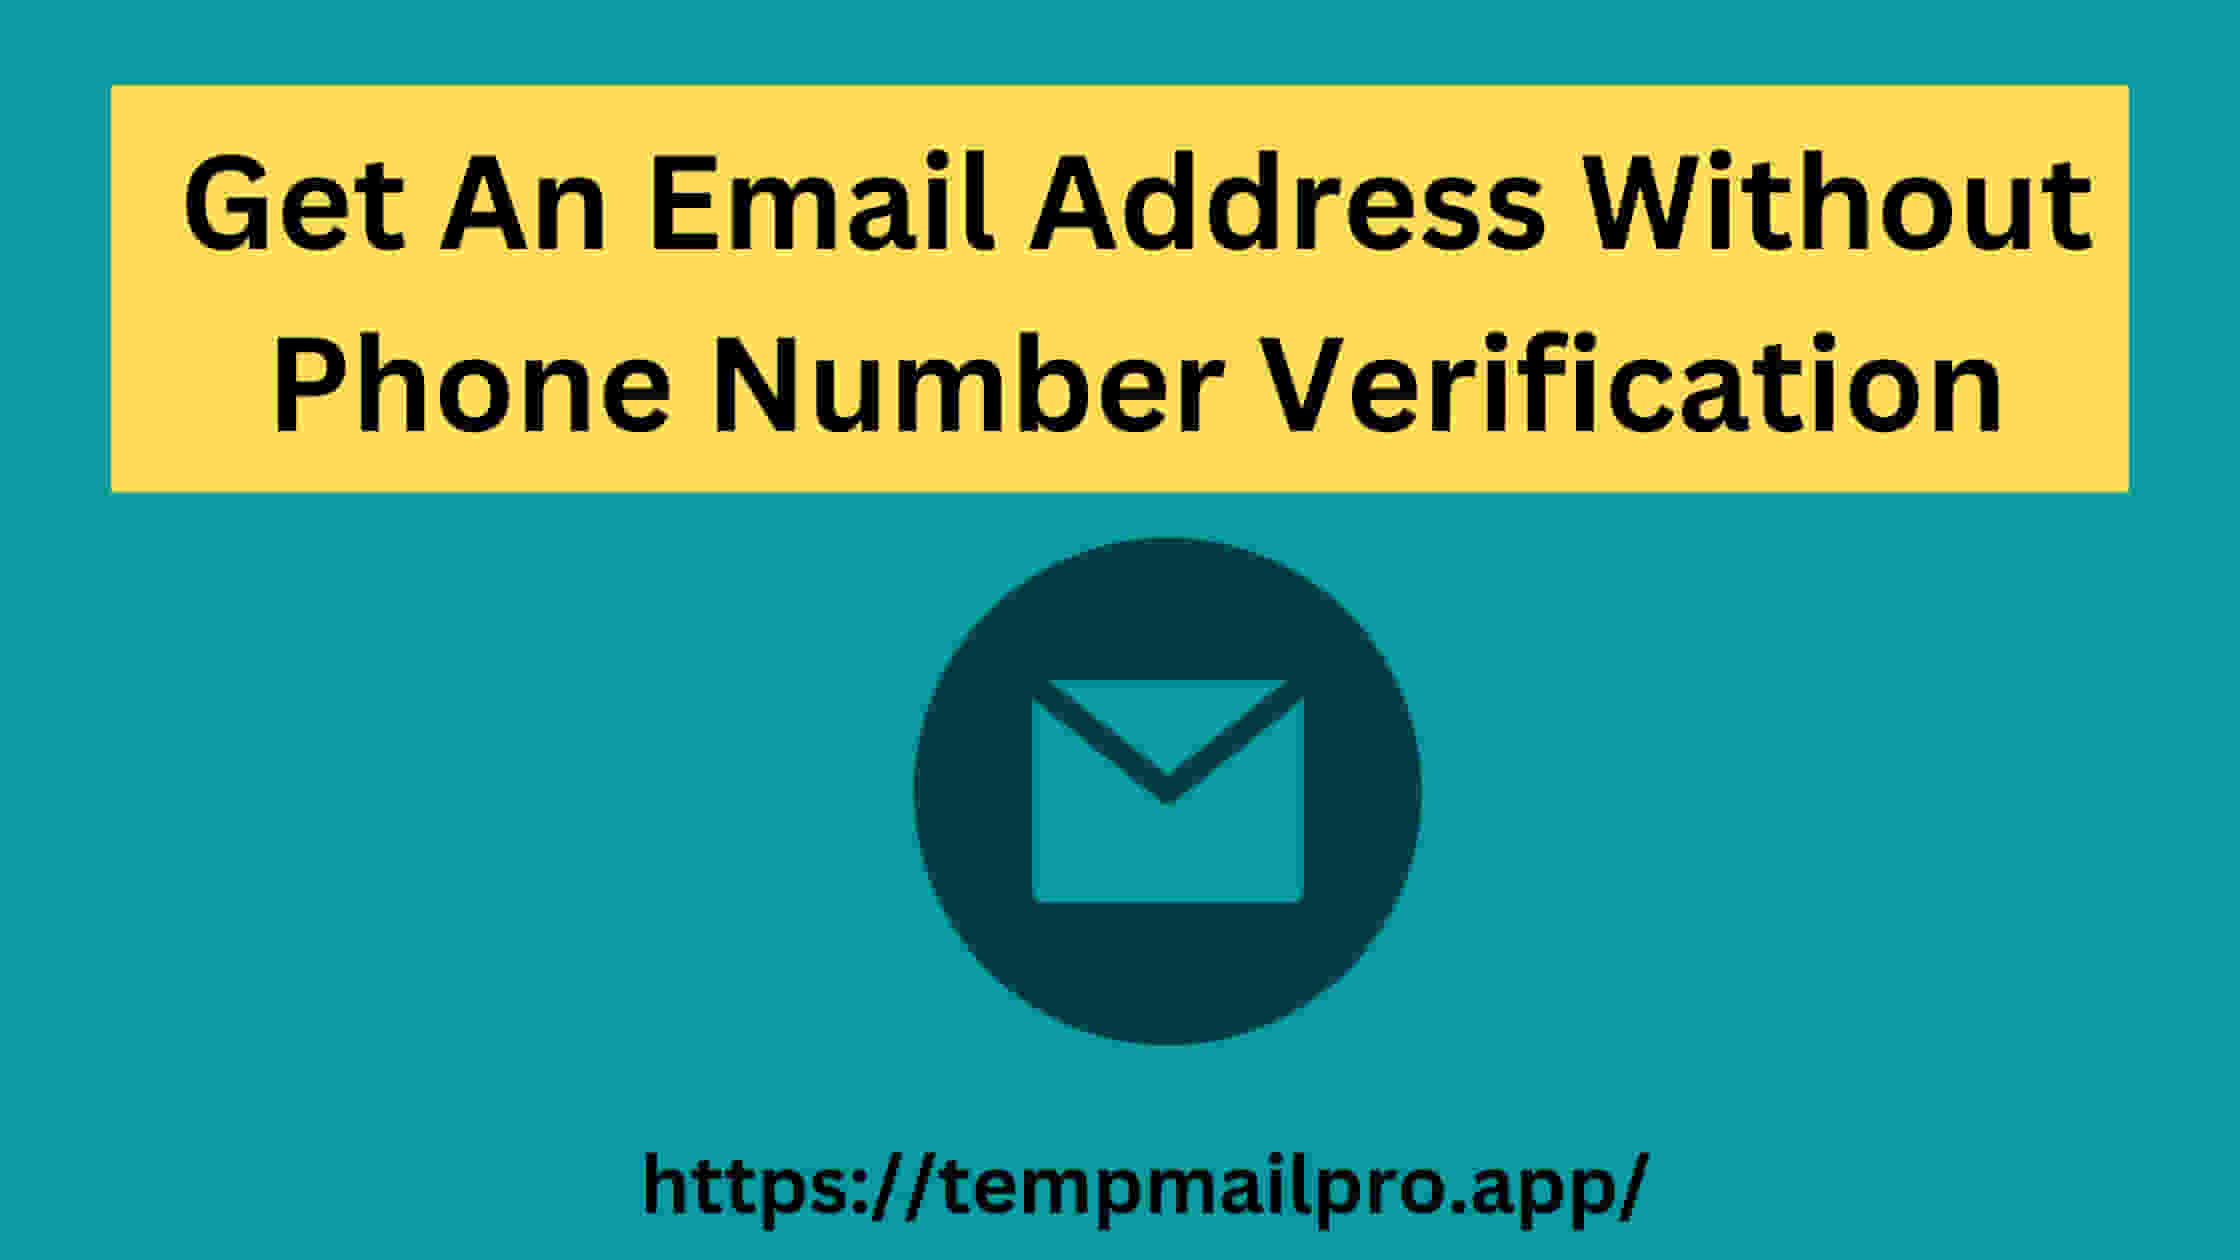 How To Get An Email Address Without Phone Number Verification